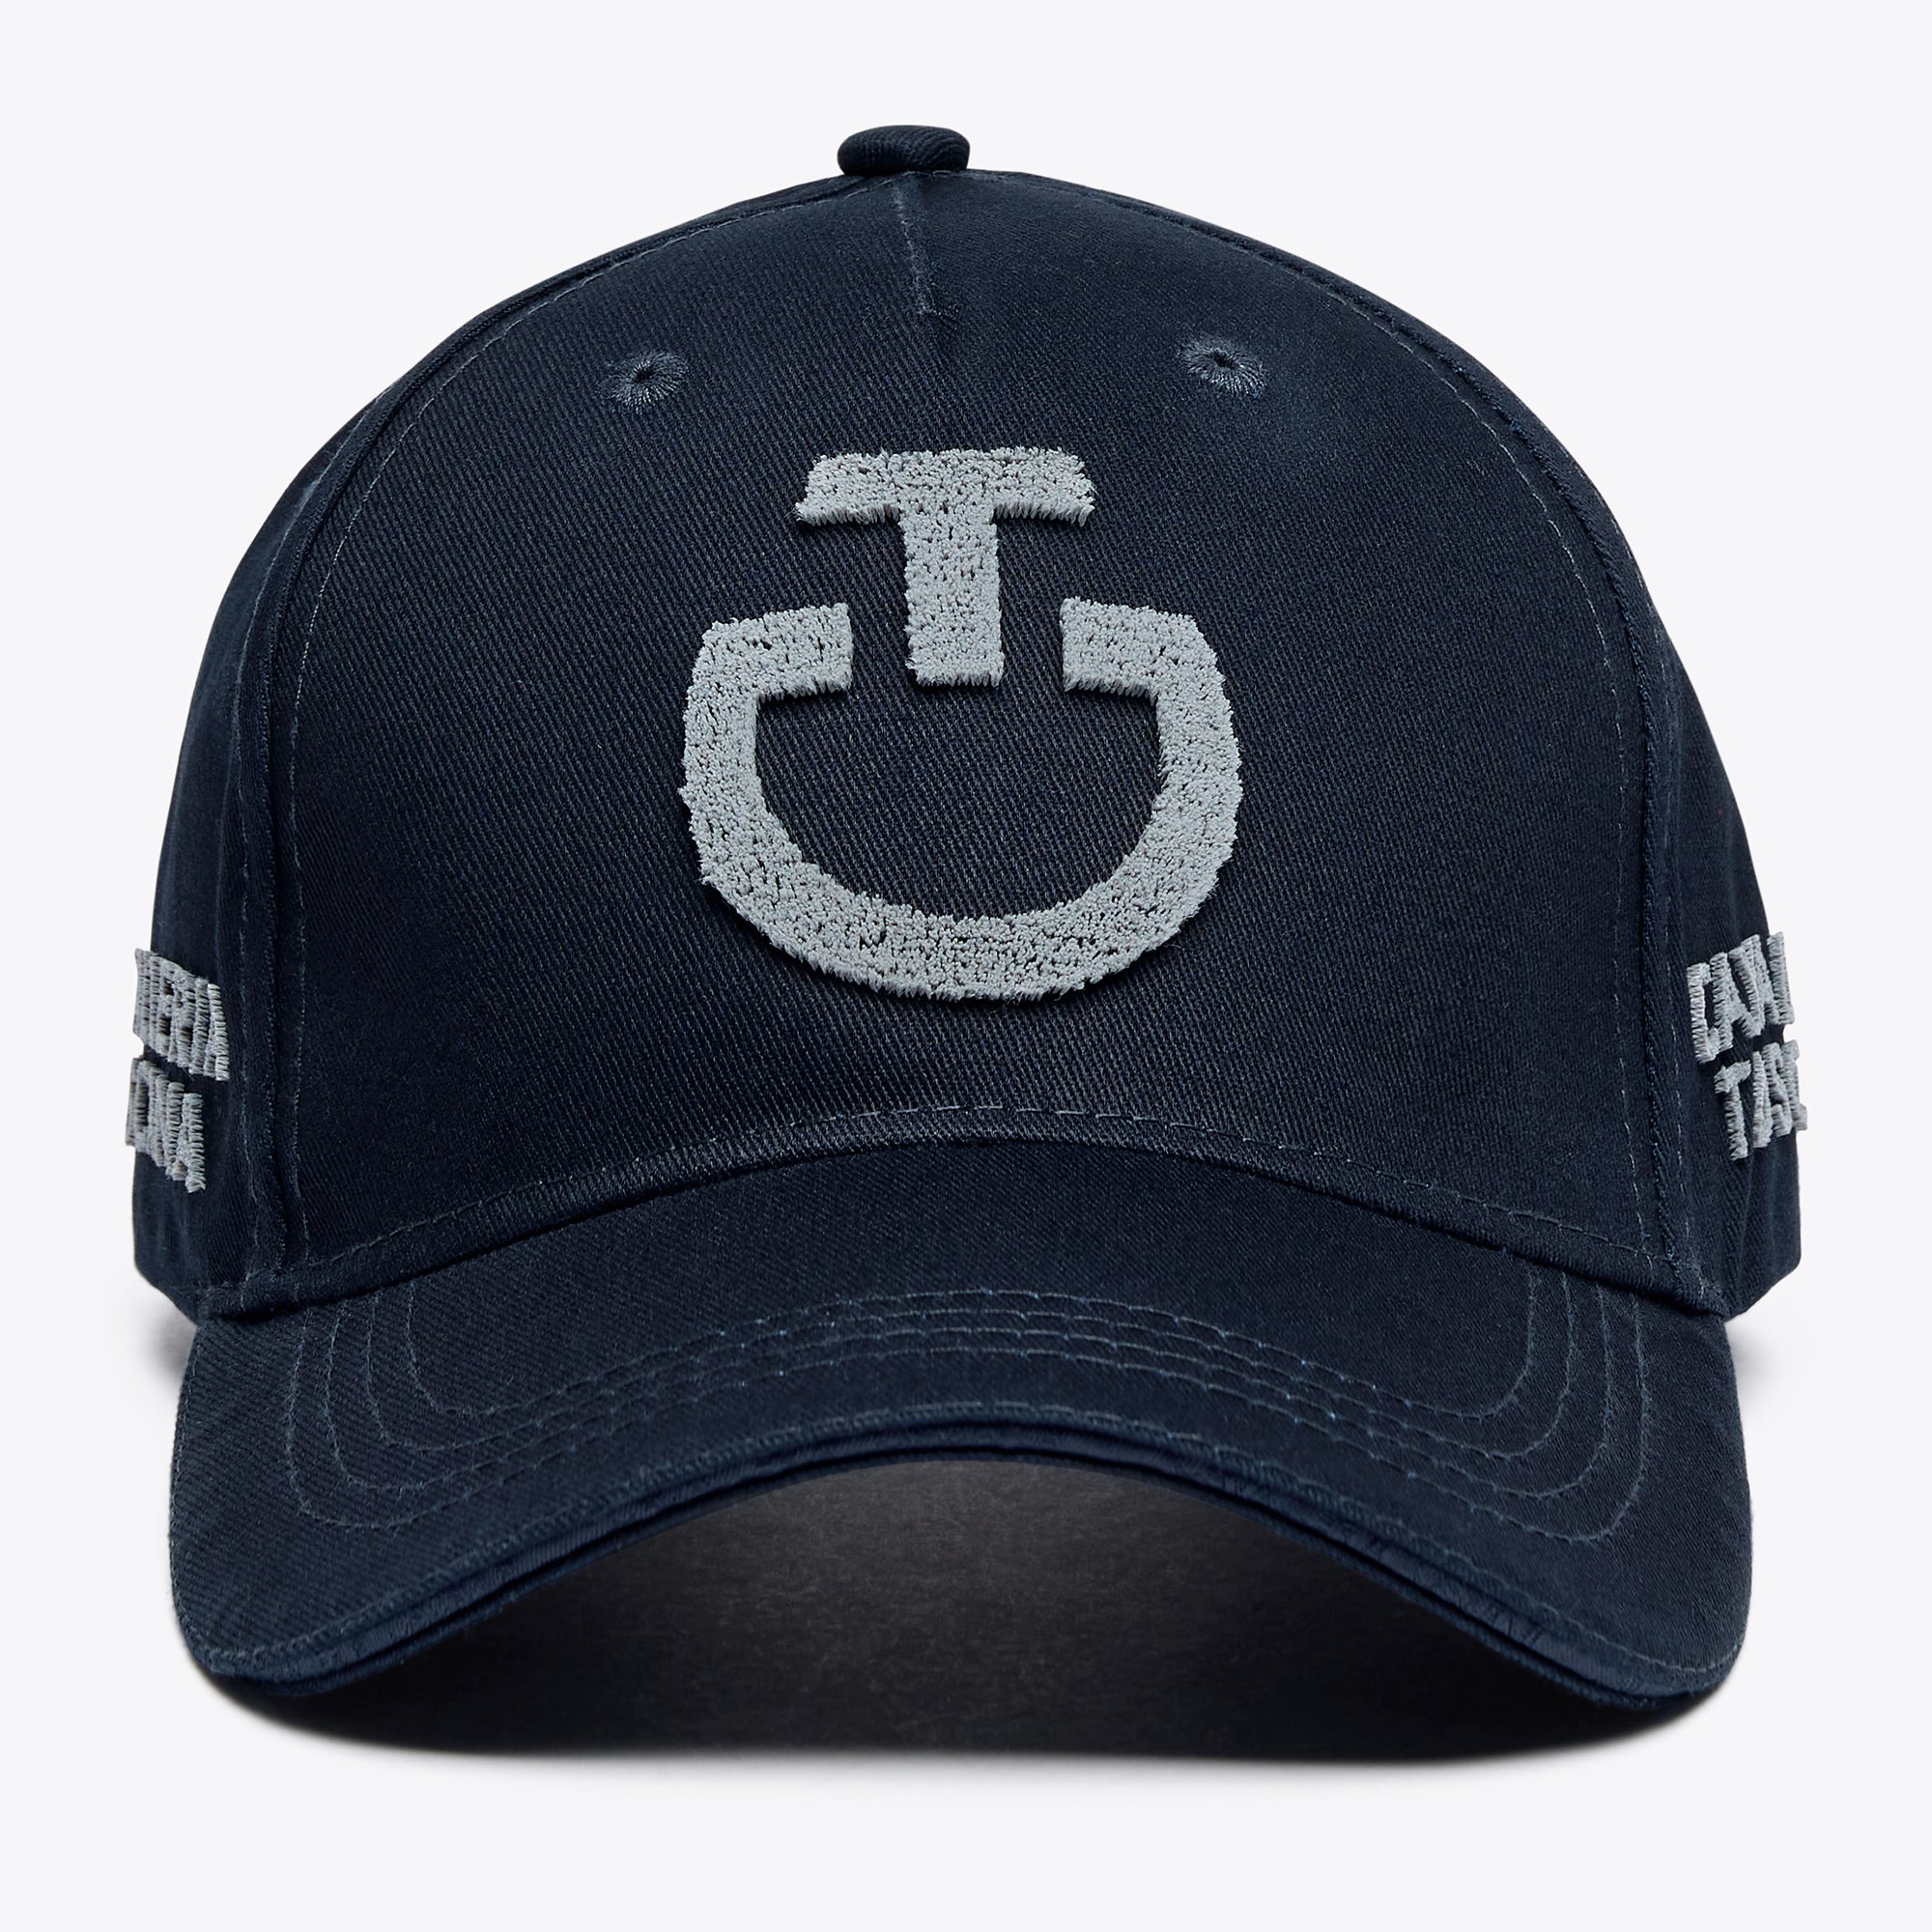 COTTON BASEBALL CAP WITH LOOP EMBROIDERY LOGO